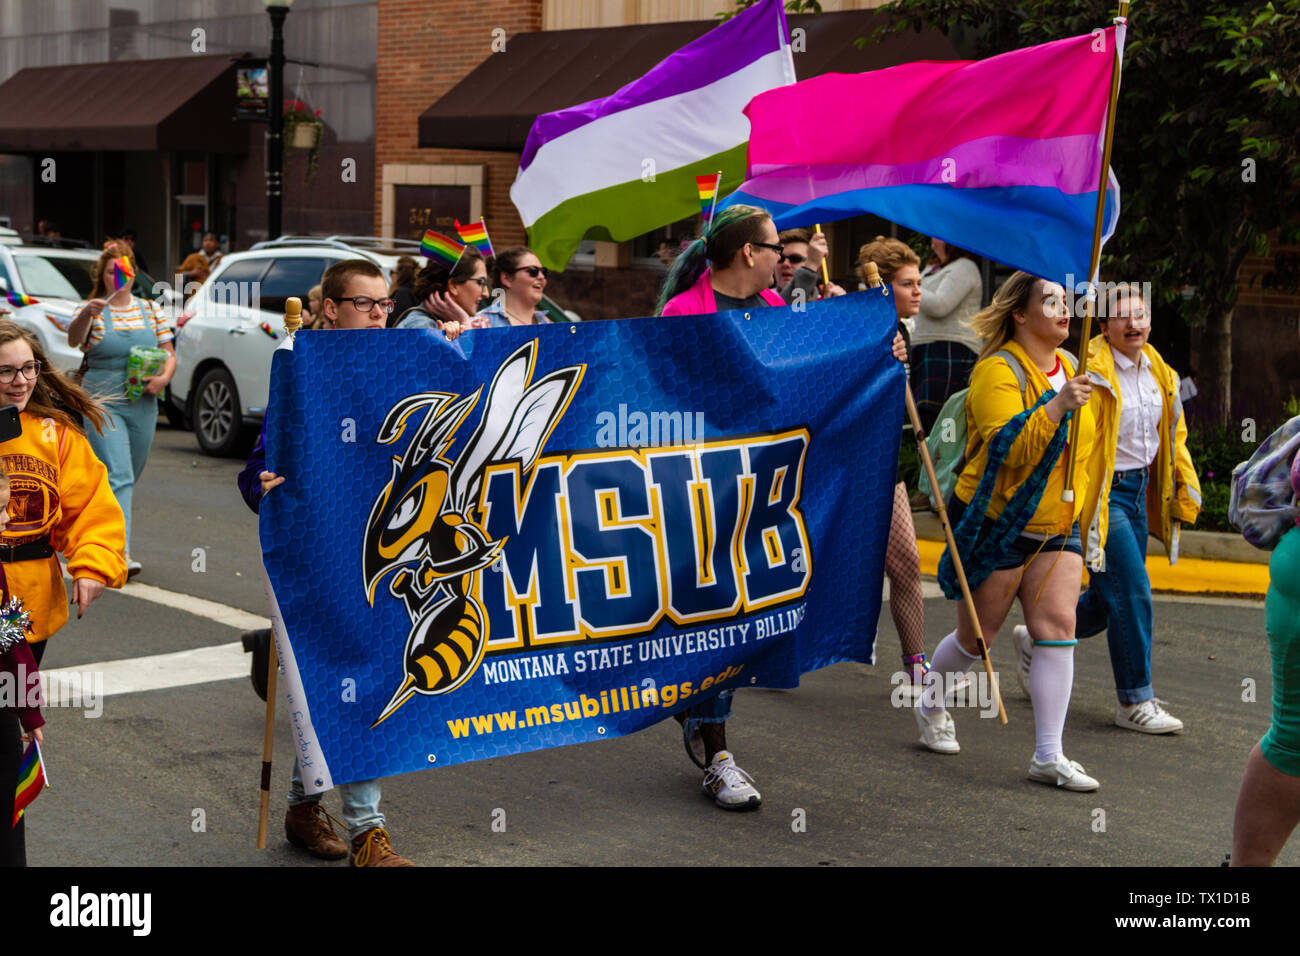 Montana State University - Billings showing their support for the LGBTQ+ community of Montana during the 2019 Pride Parade. Helena, Montana, USA Stock Photo